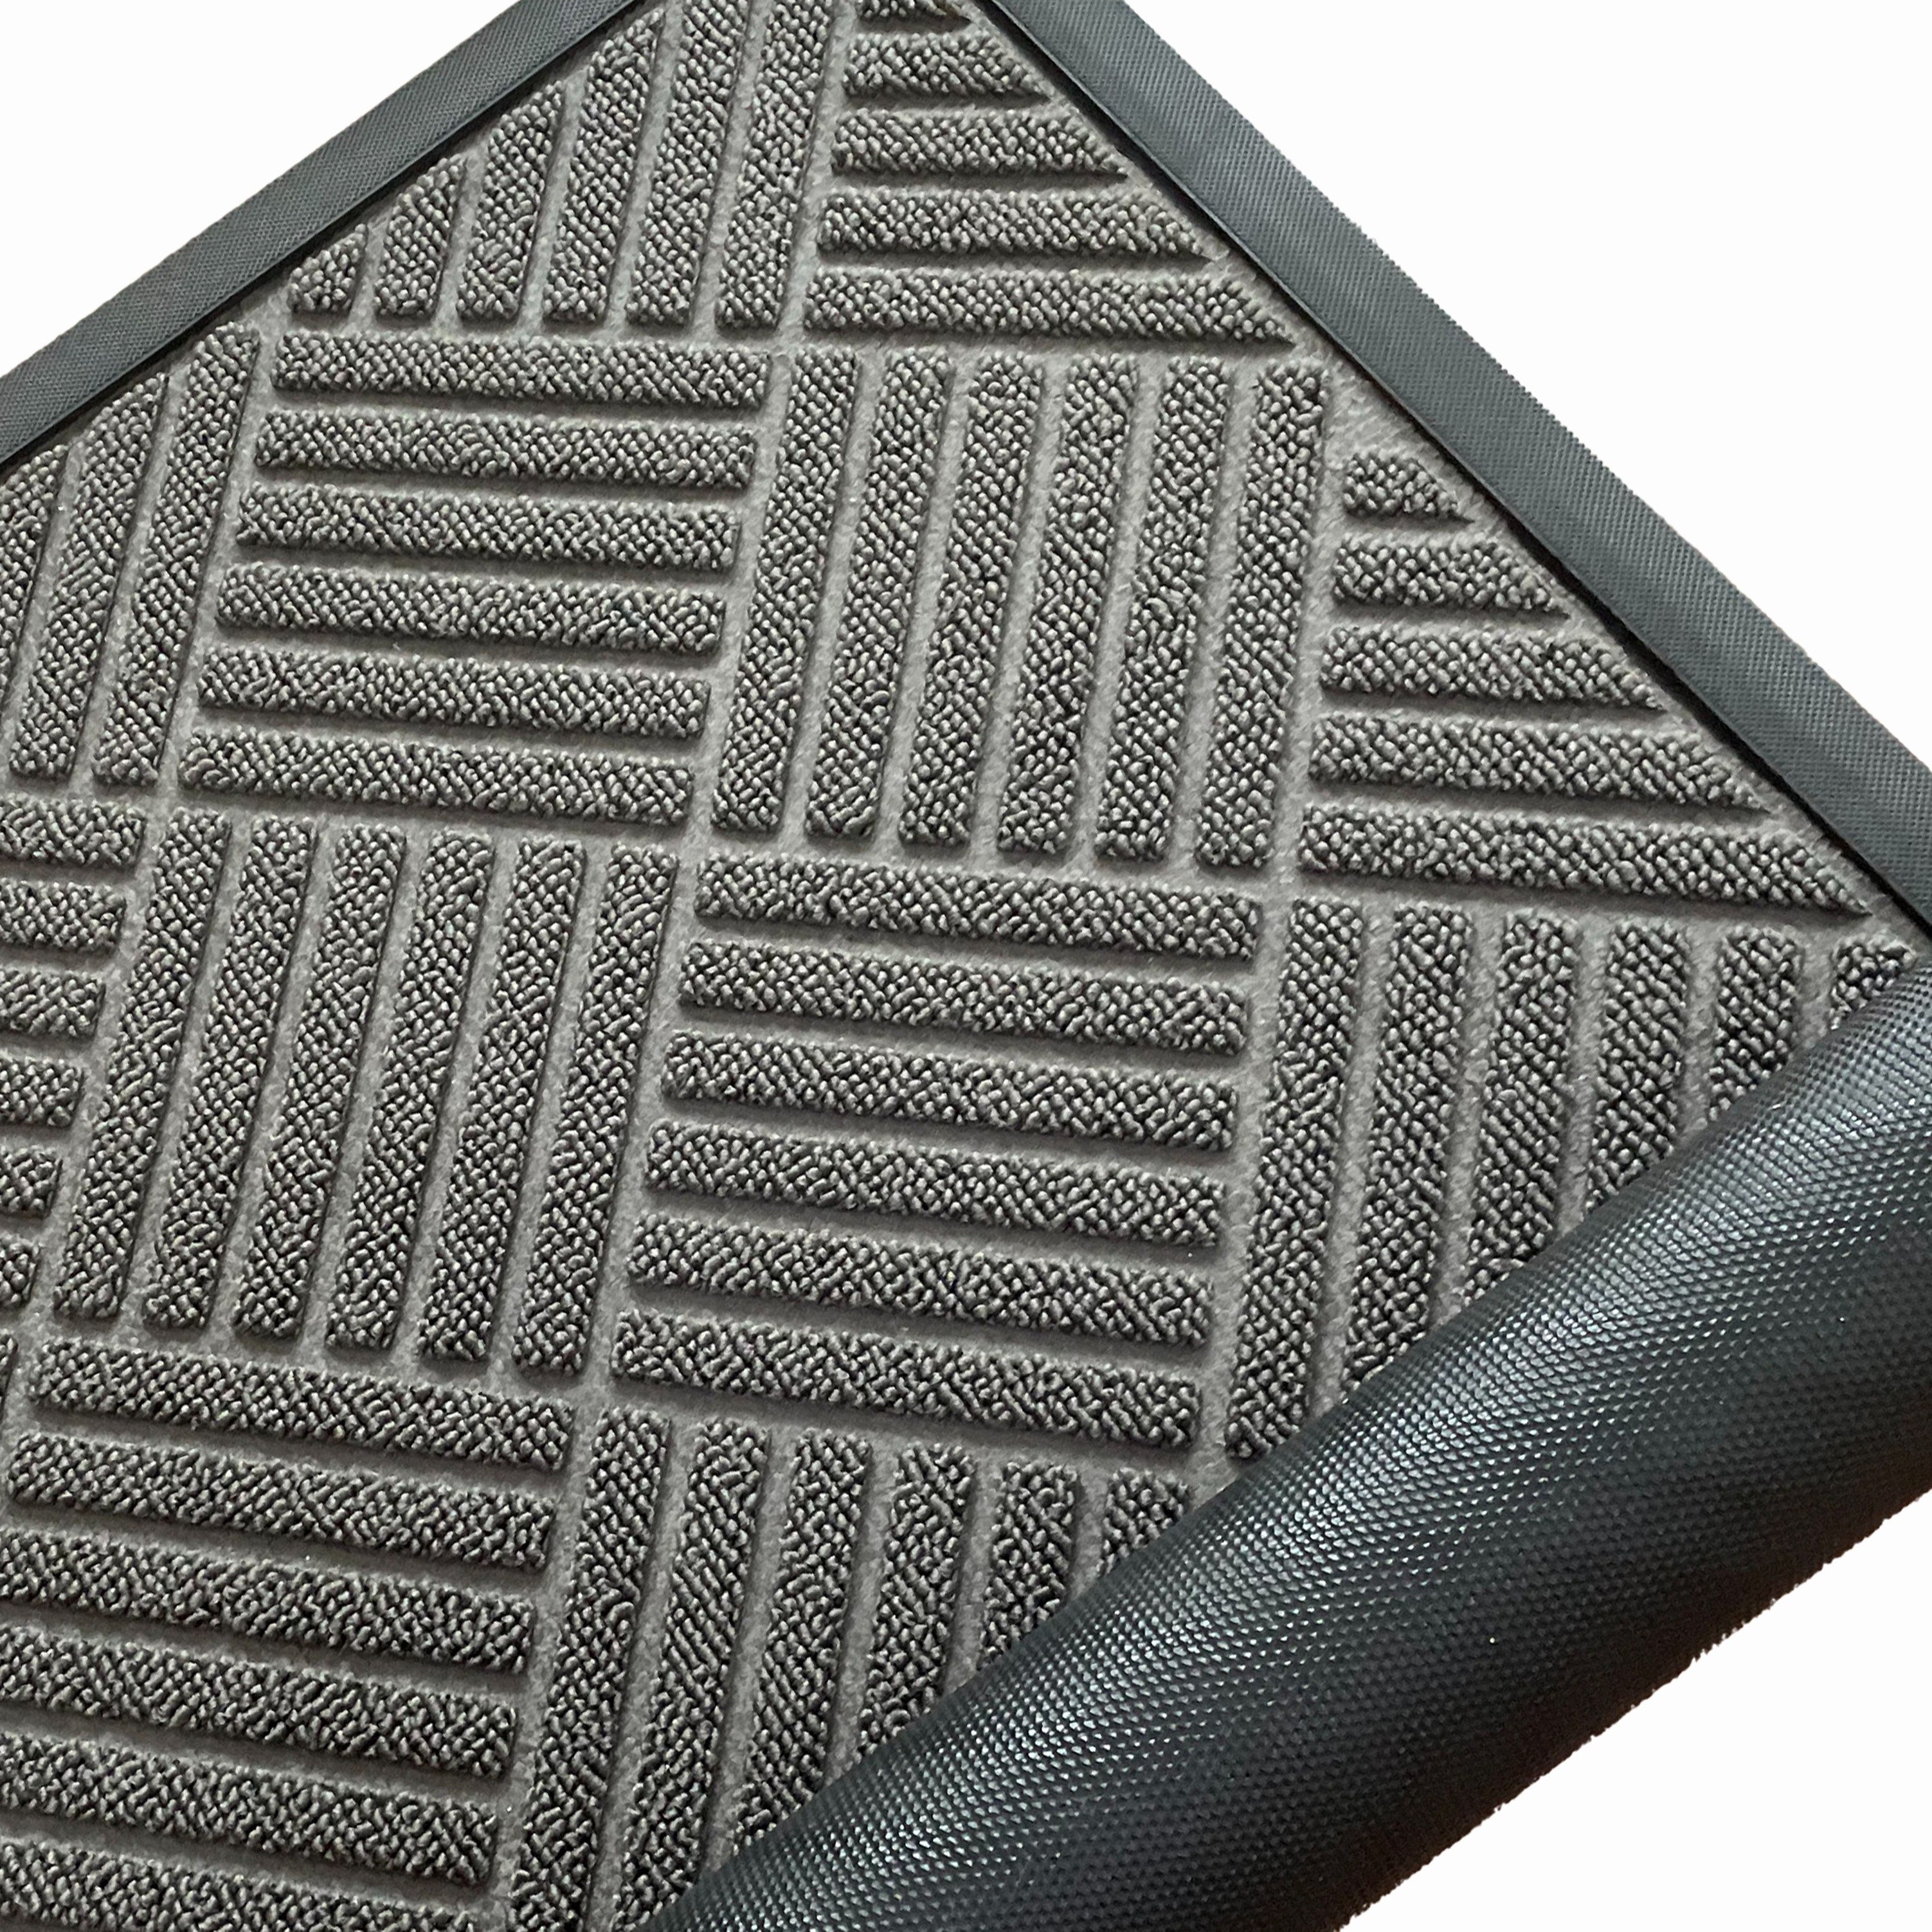 Slonser Extra Durable Door Mats For Outside Entry 18X30 Dirt